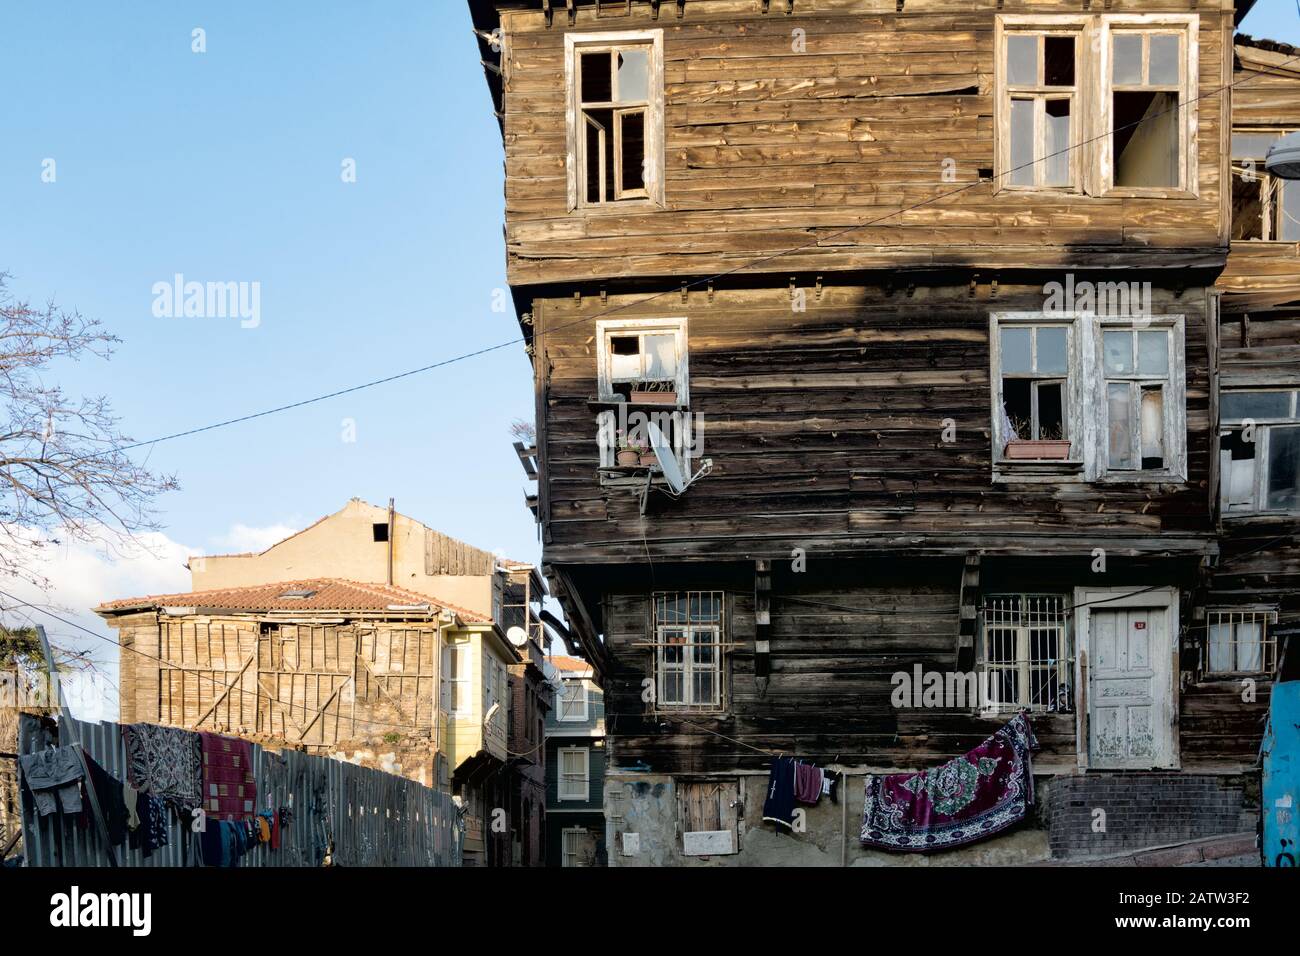 Old houses in historical Fatih area of Istanbul, laundry and rugs hanging out to dry Stock Photo